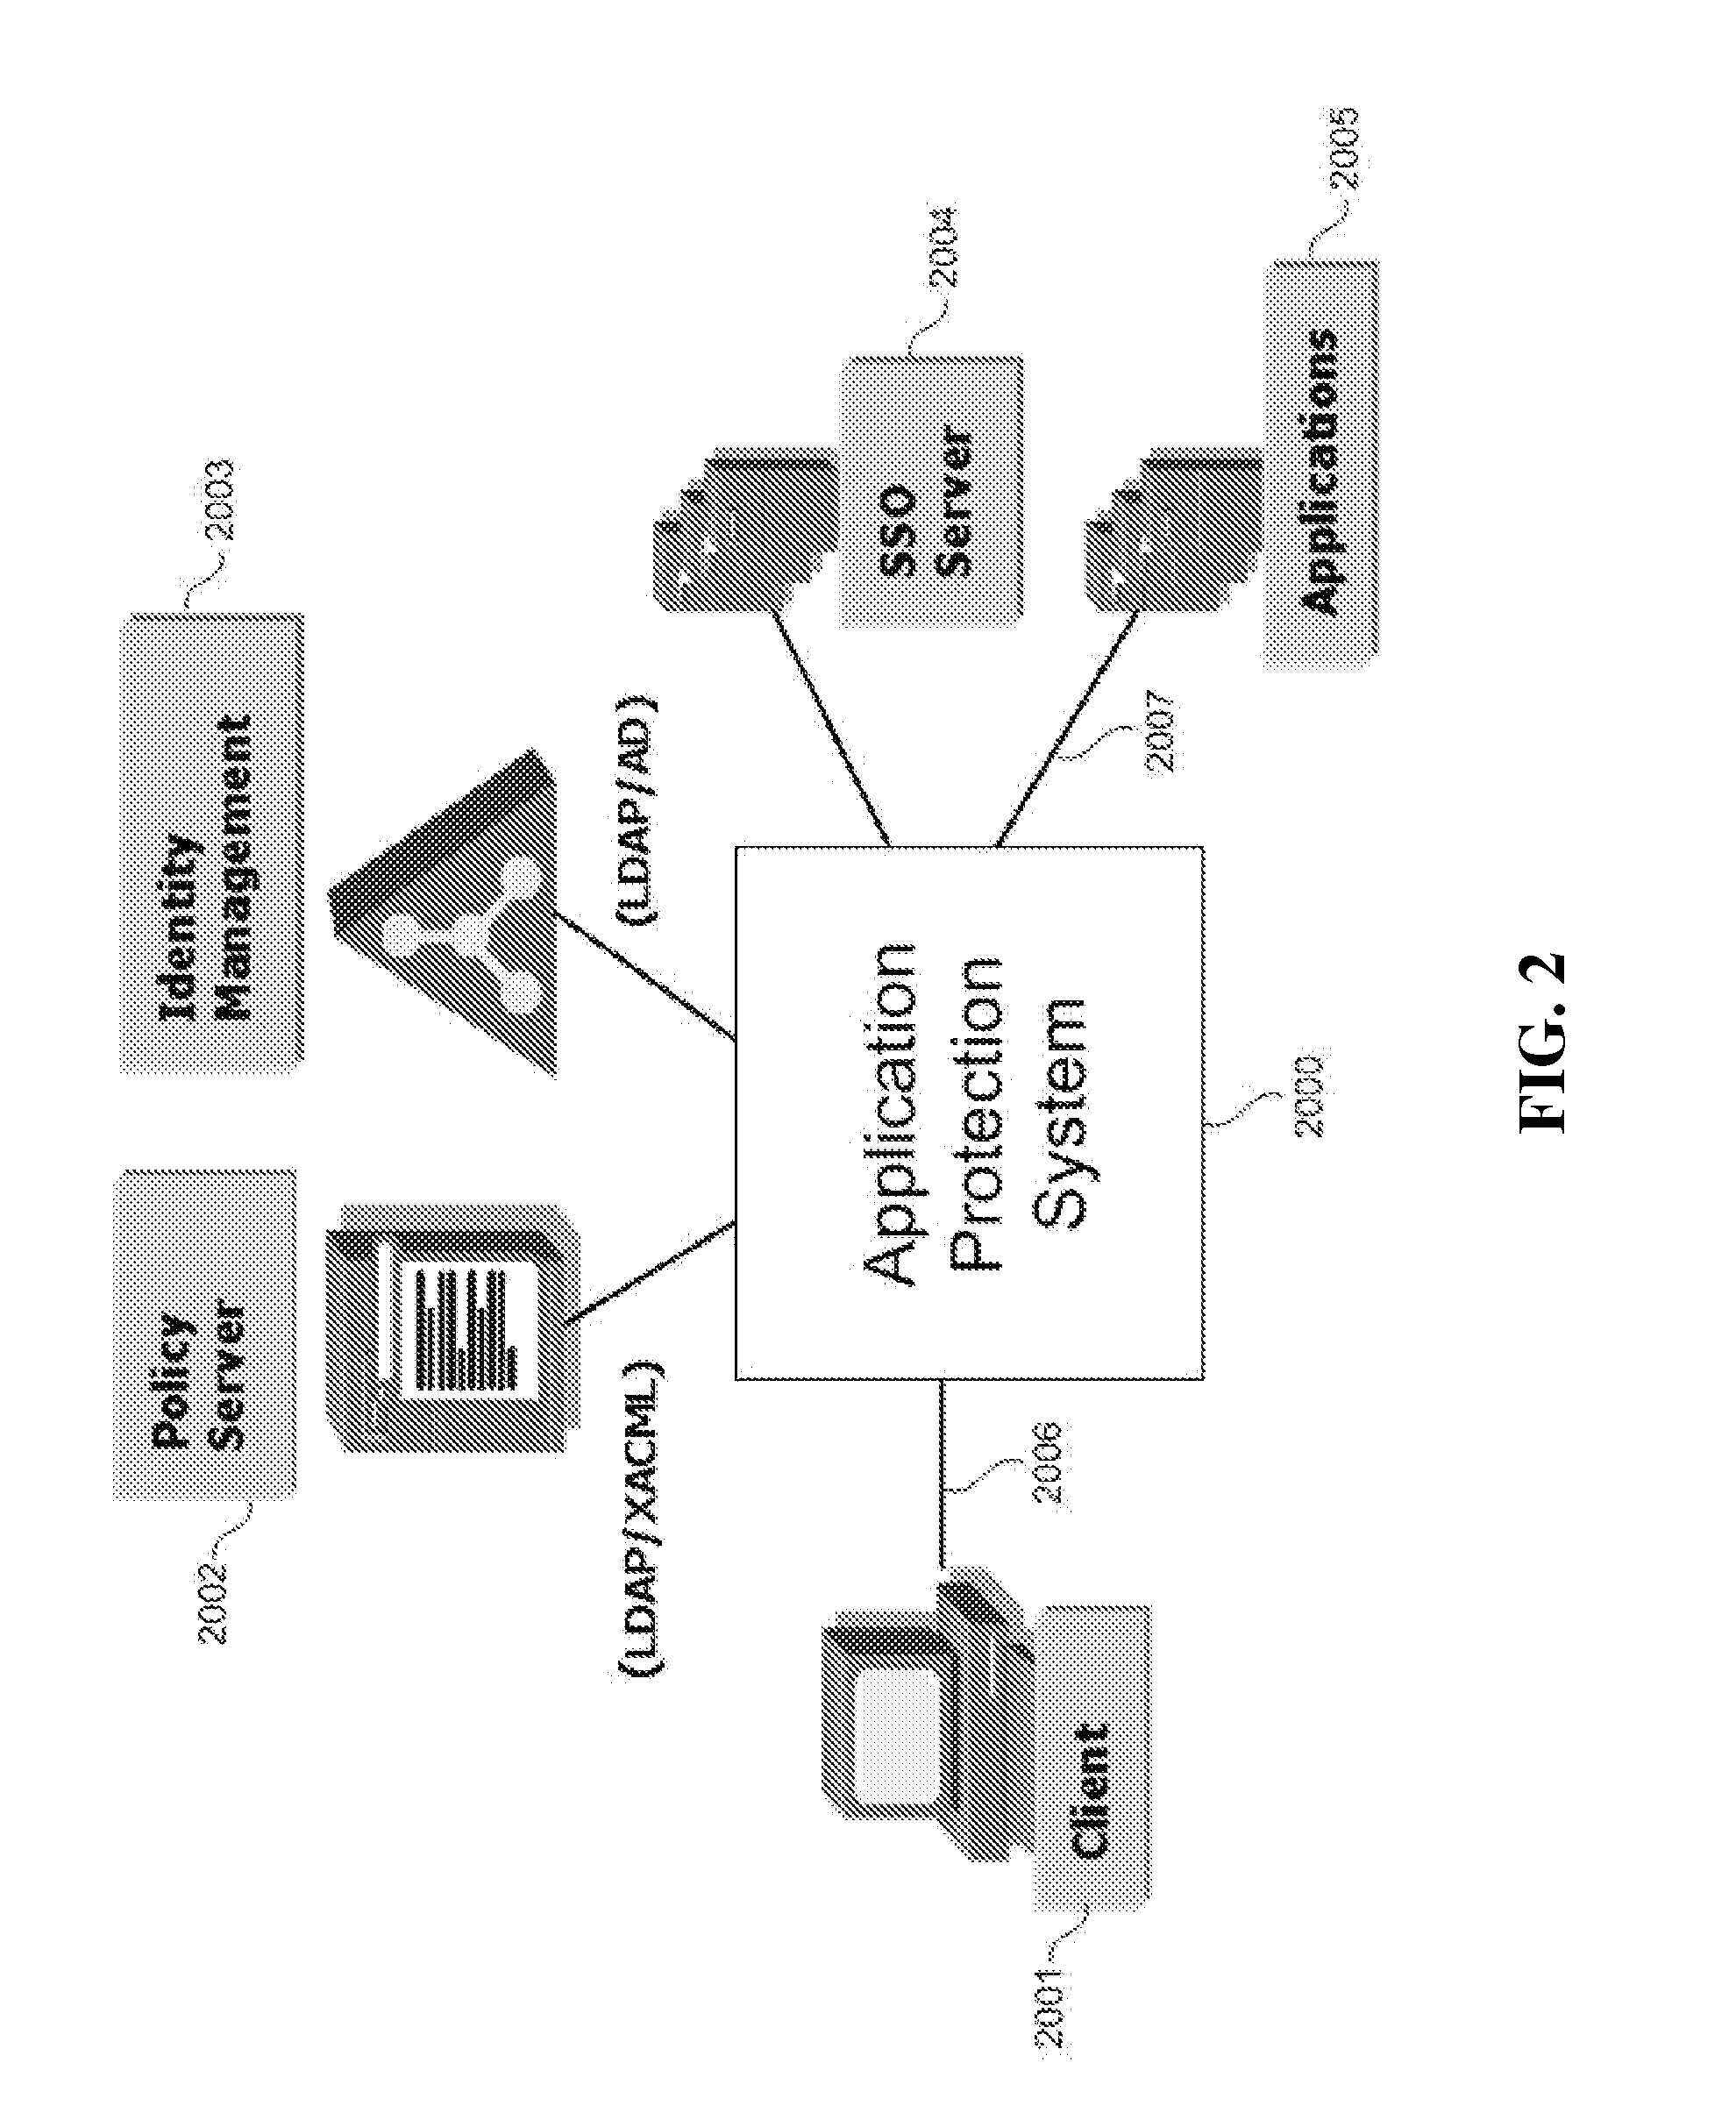 Application network appliance with built-in virtual directory interface